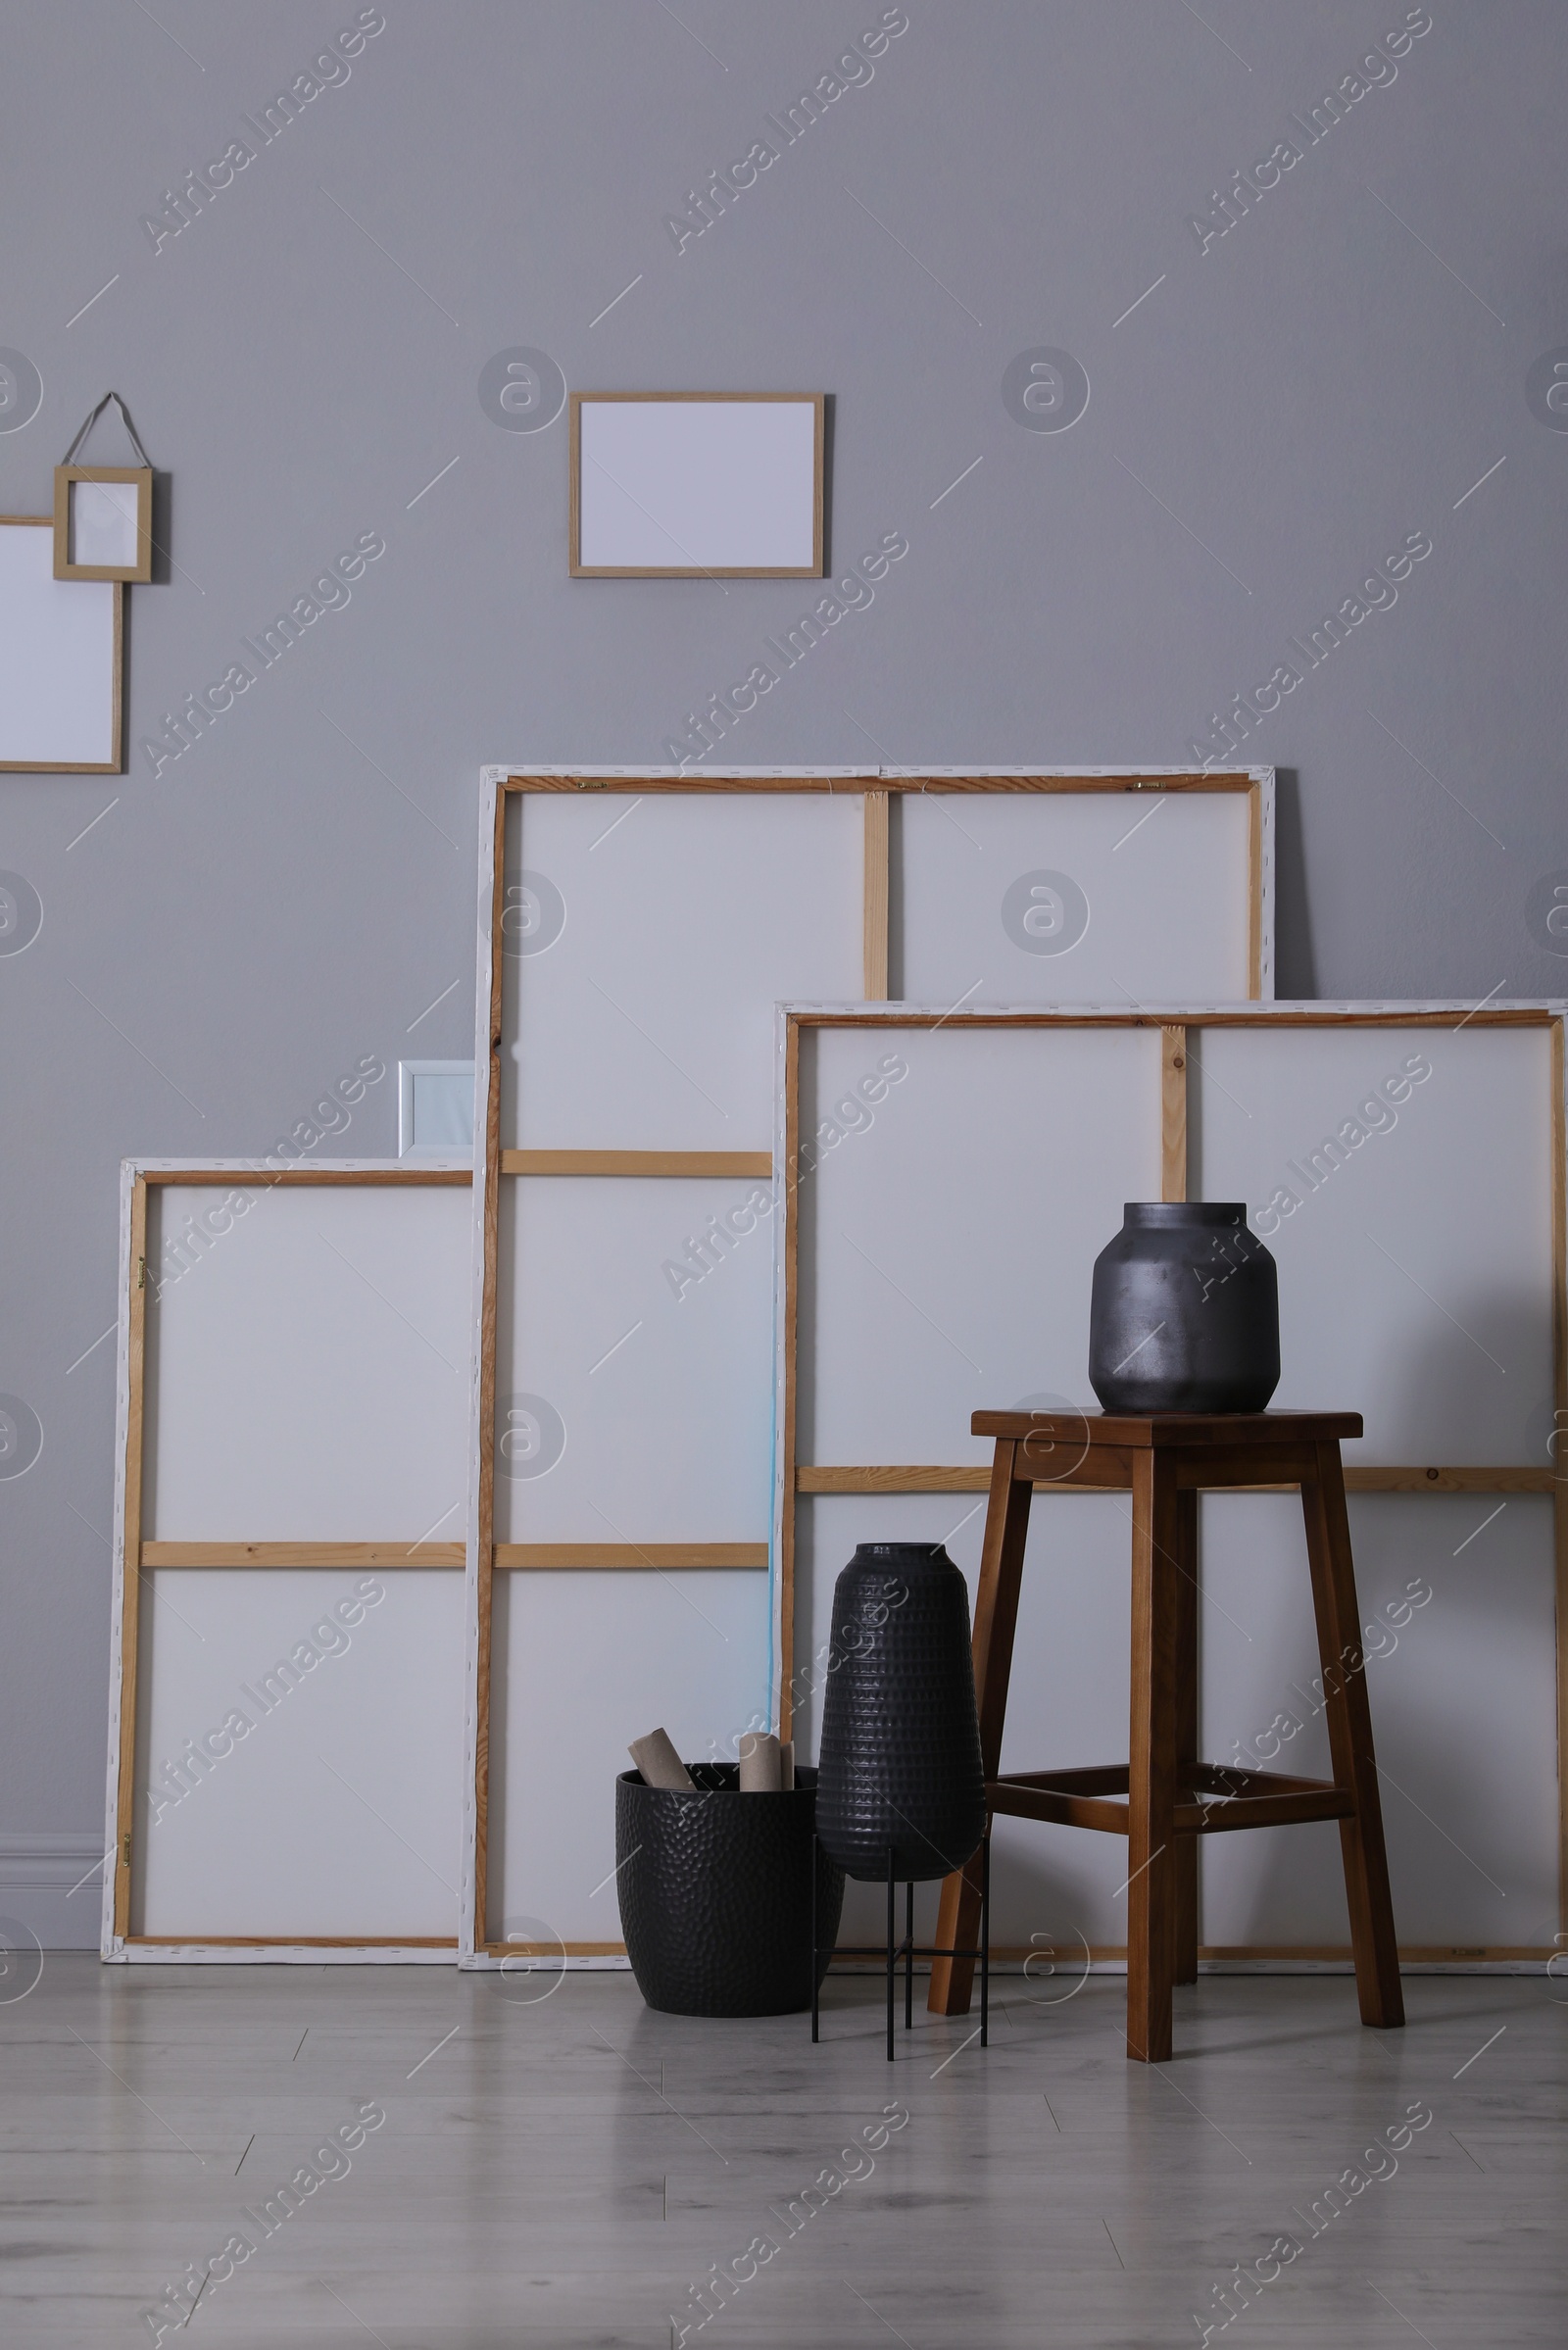 Photo of Many paintings, wooden stool and vases near grey wall in artist's studio